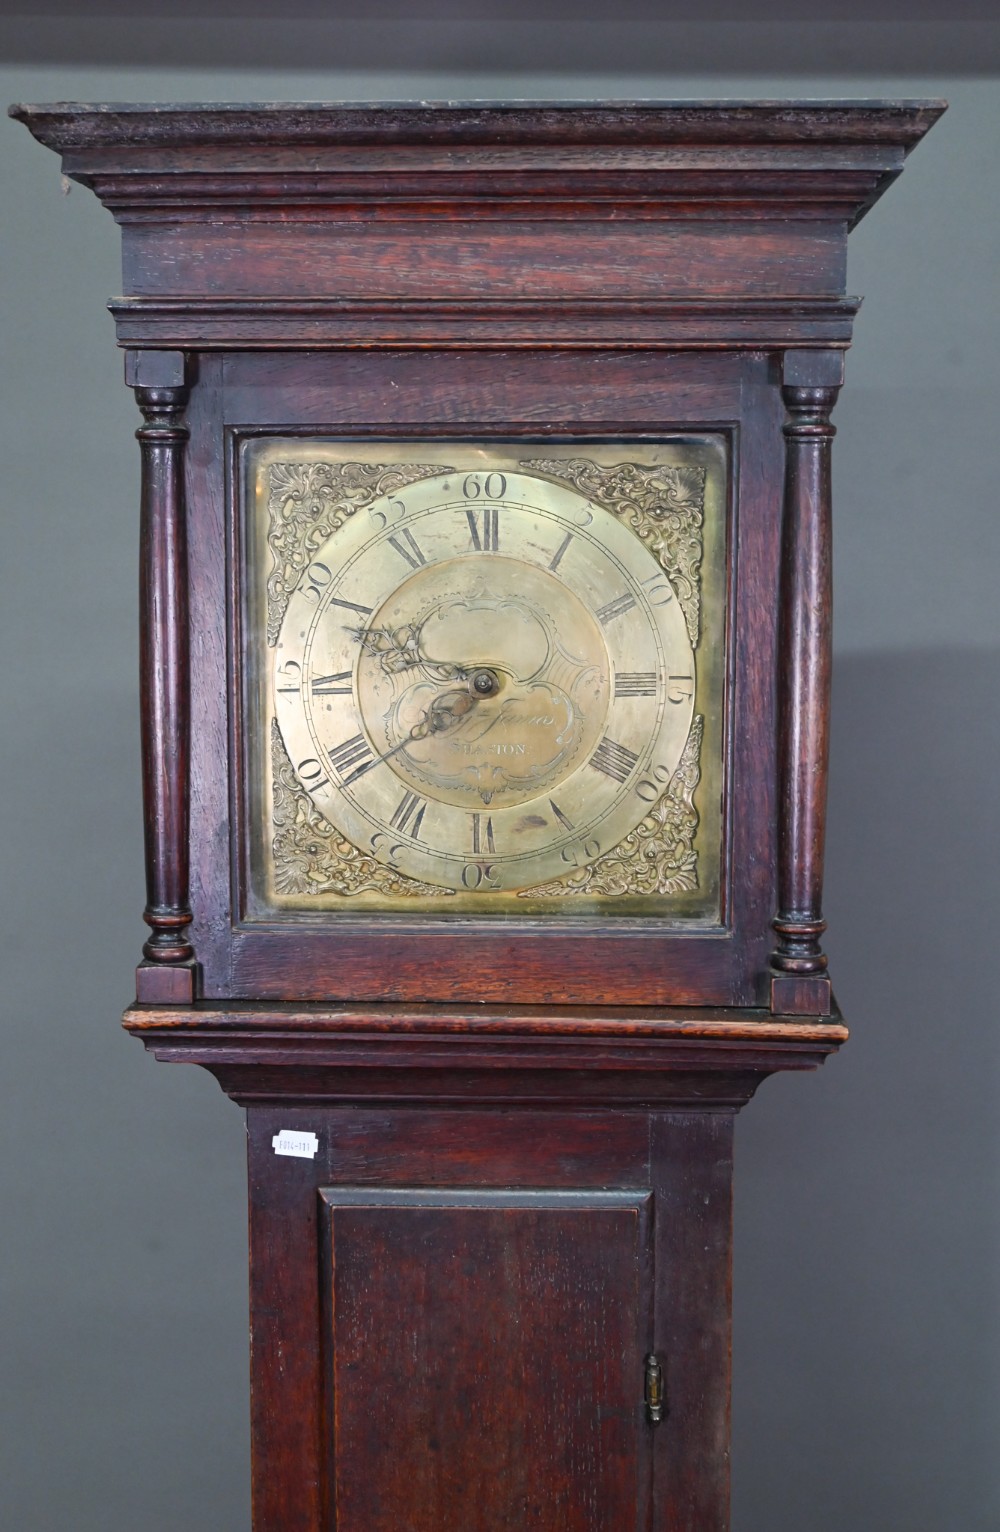 Benjamin James, Shaston, an 18th century oak longcase clock, the 30 hour movement with engraved - Image 2 of 6